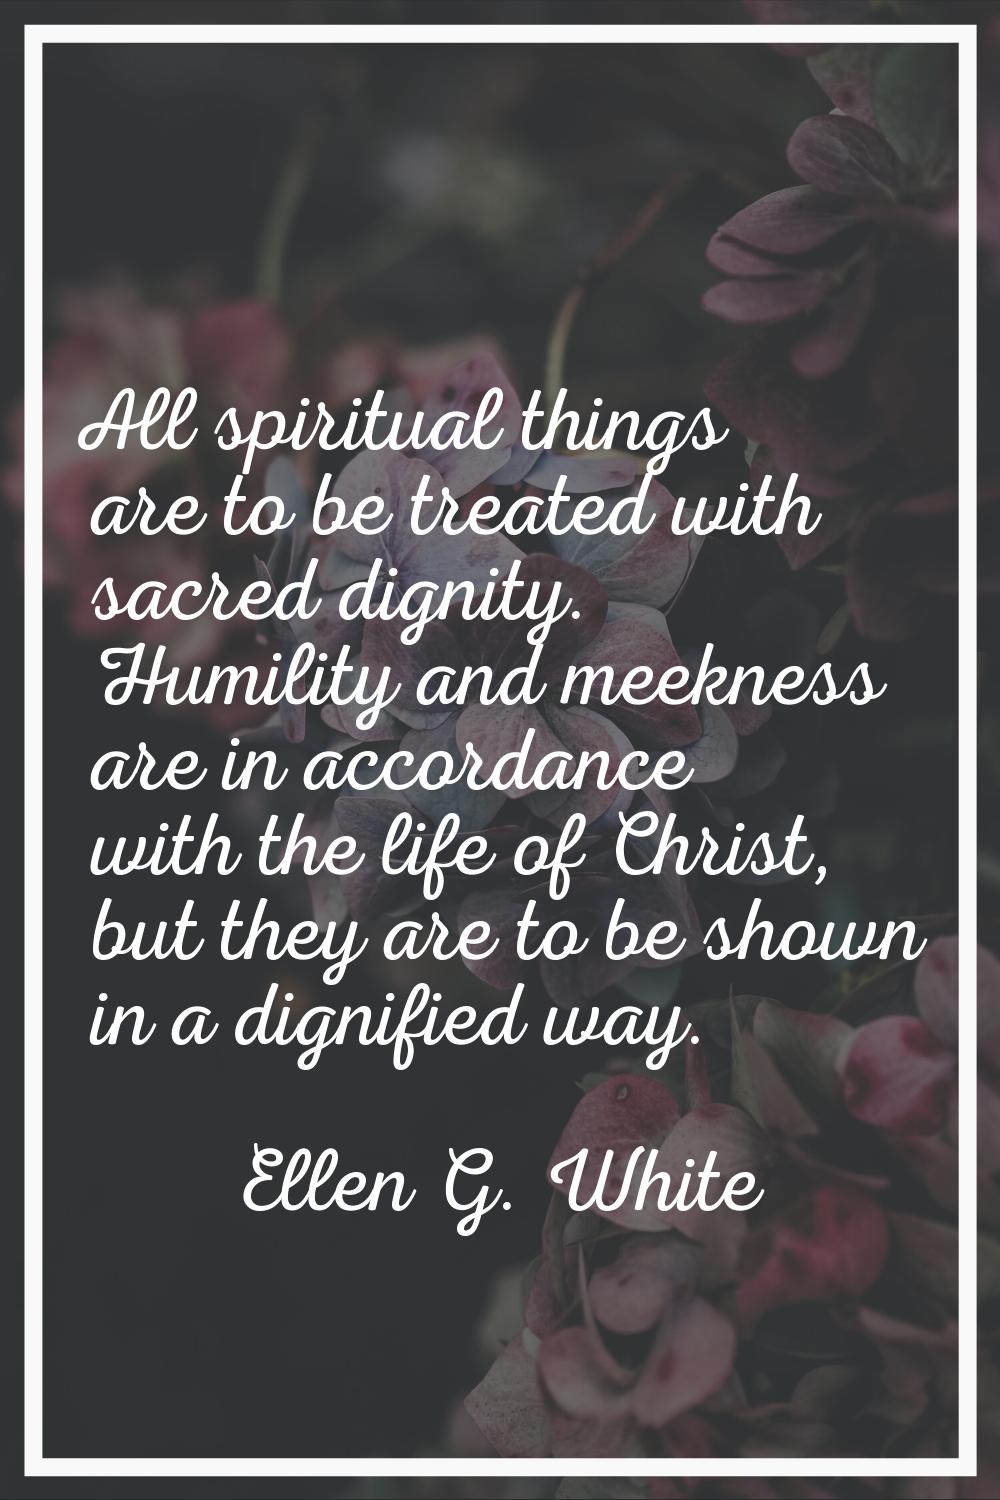 All spiritual things are to be treated with sacred dignity. Humility and meekness are in accordance